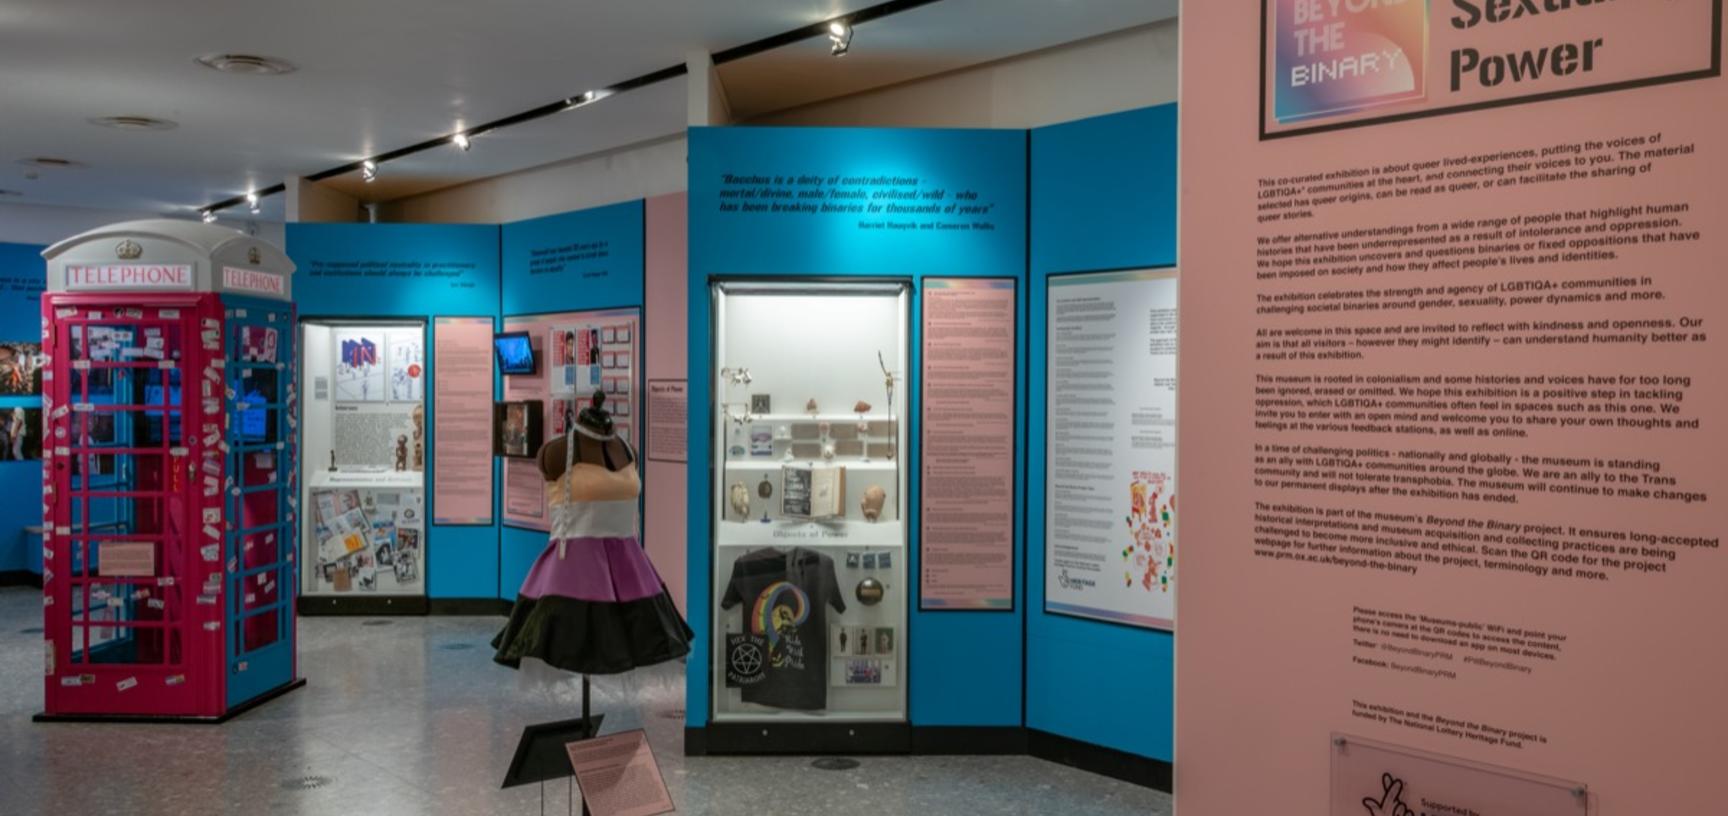 ‘Beyond the Binary: Gender, Sexuality, Power’, Pitt Rivers Museum, University of Oxford, 1 June 2021 to 8 March 2022.